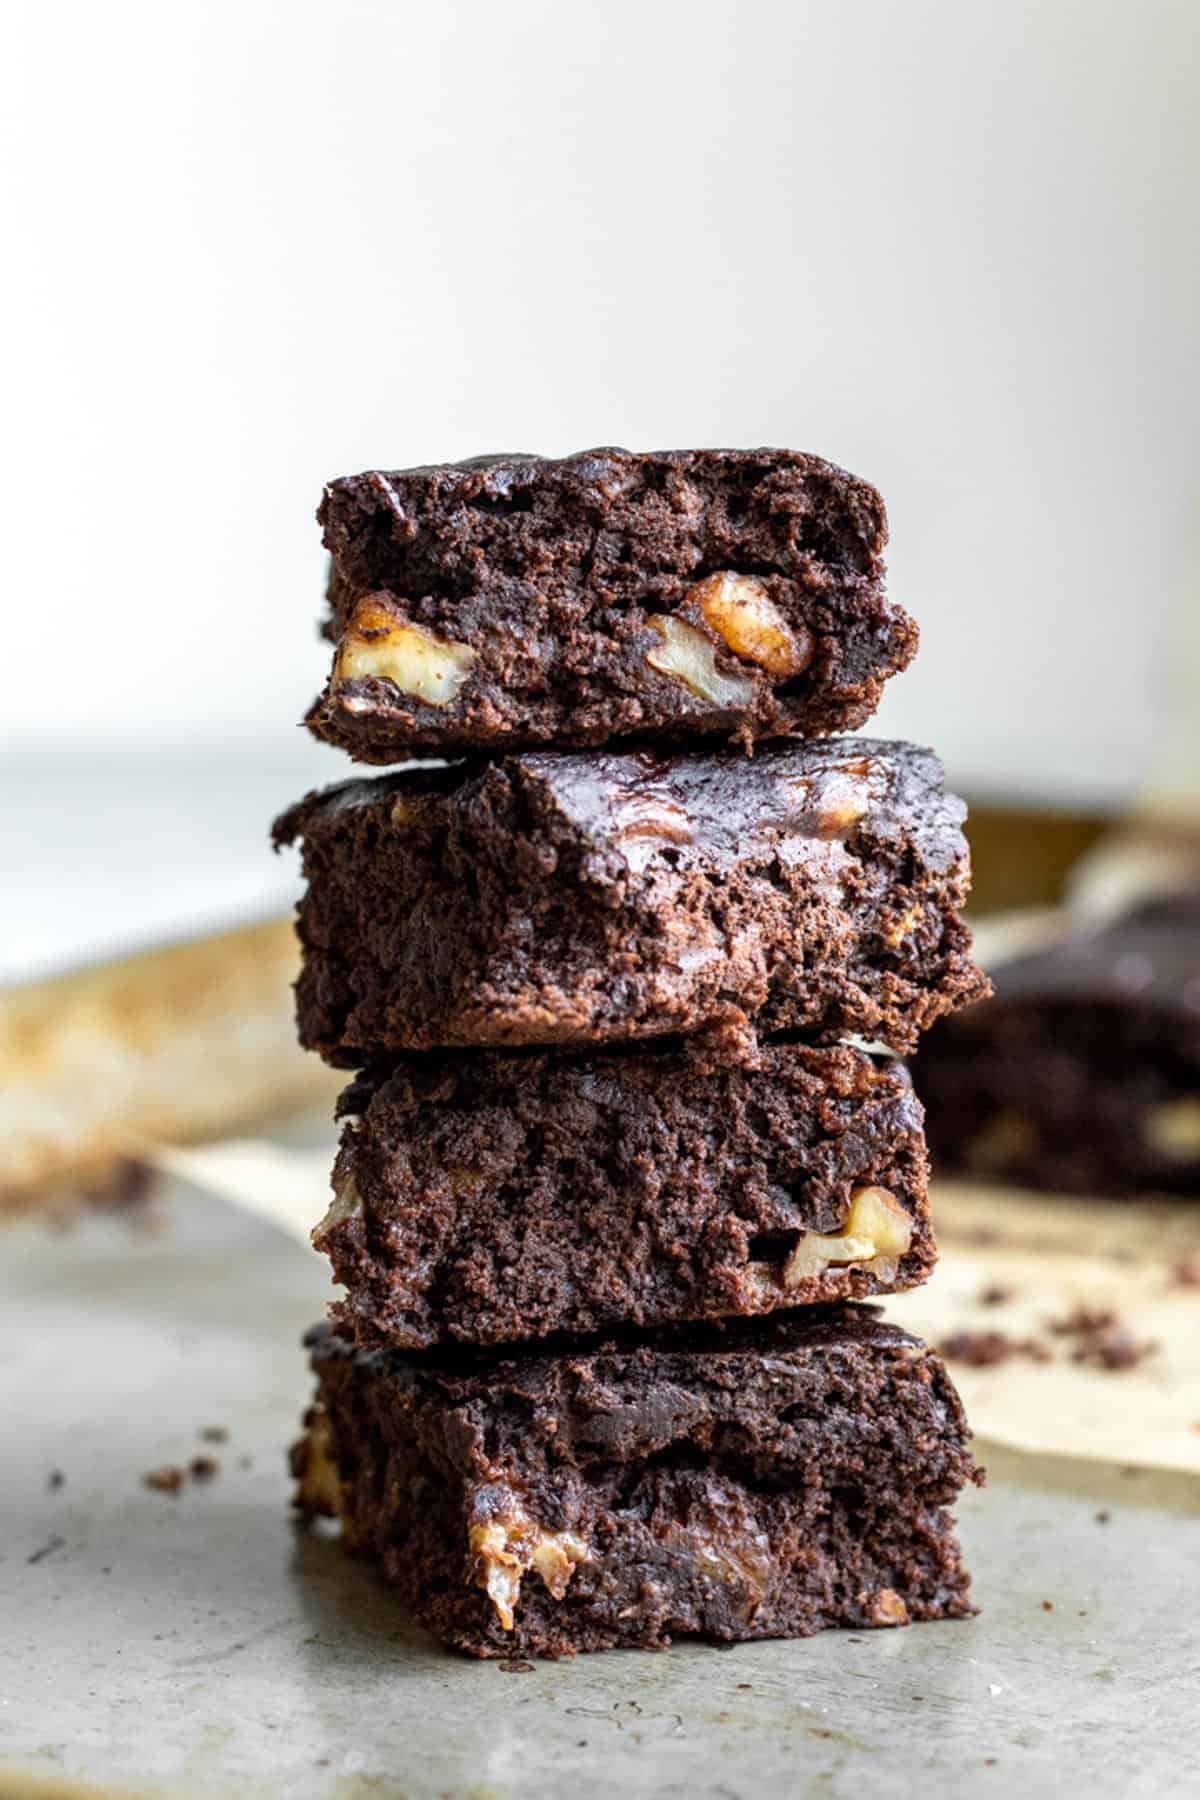 Brownies stacked on top of one another, with chunks of banana inside.